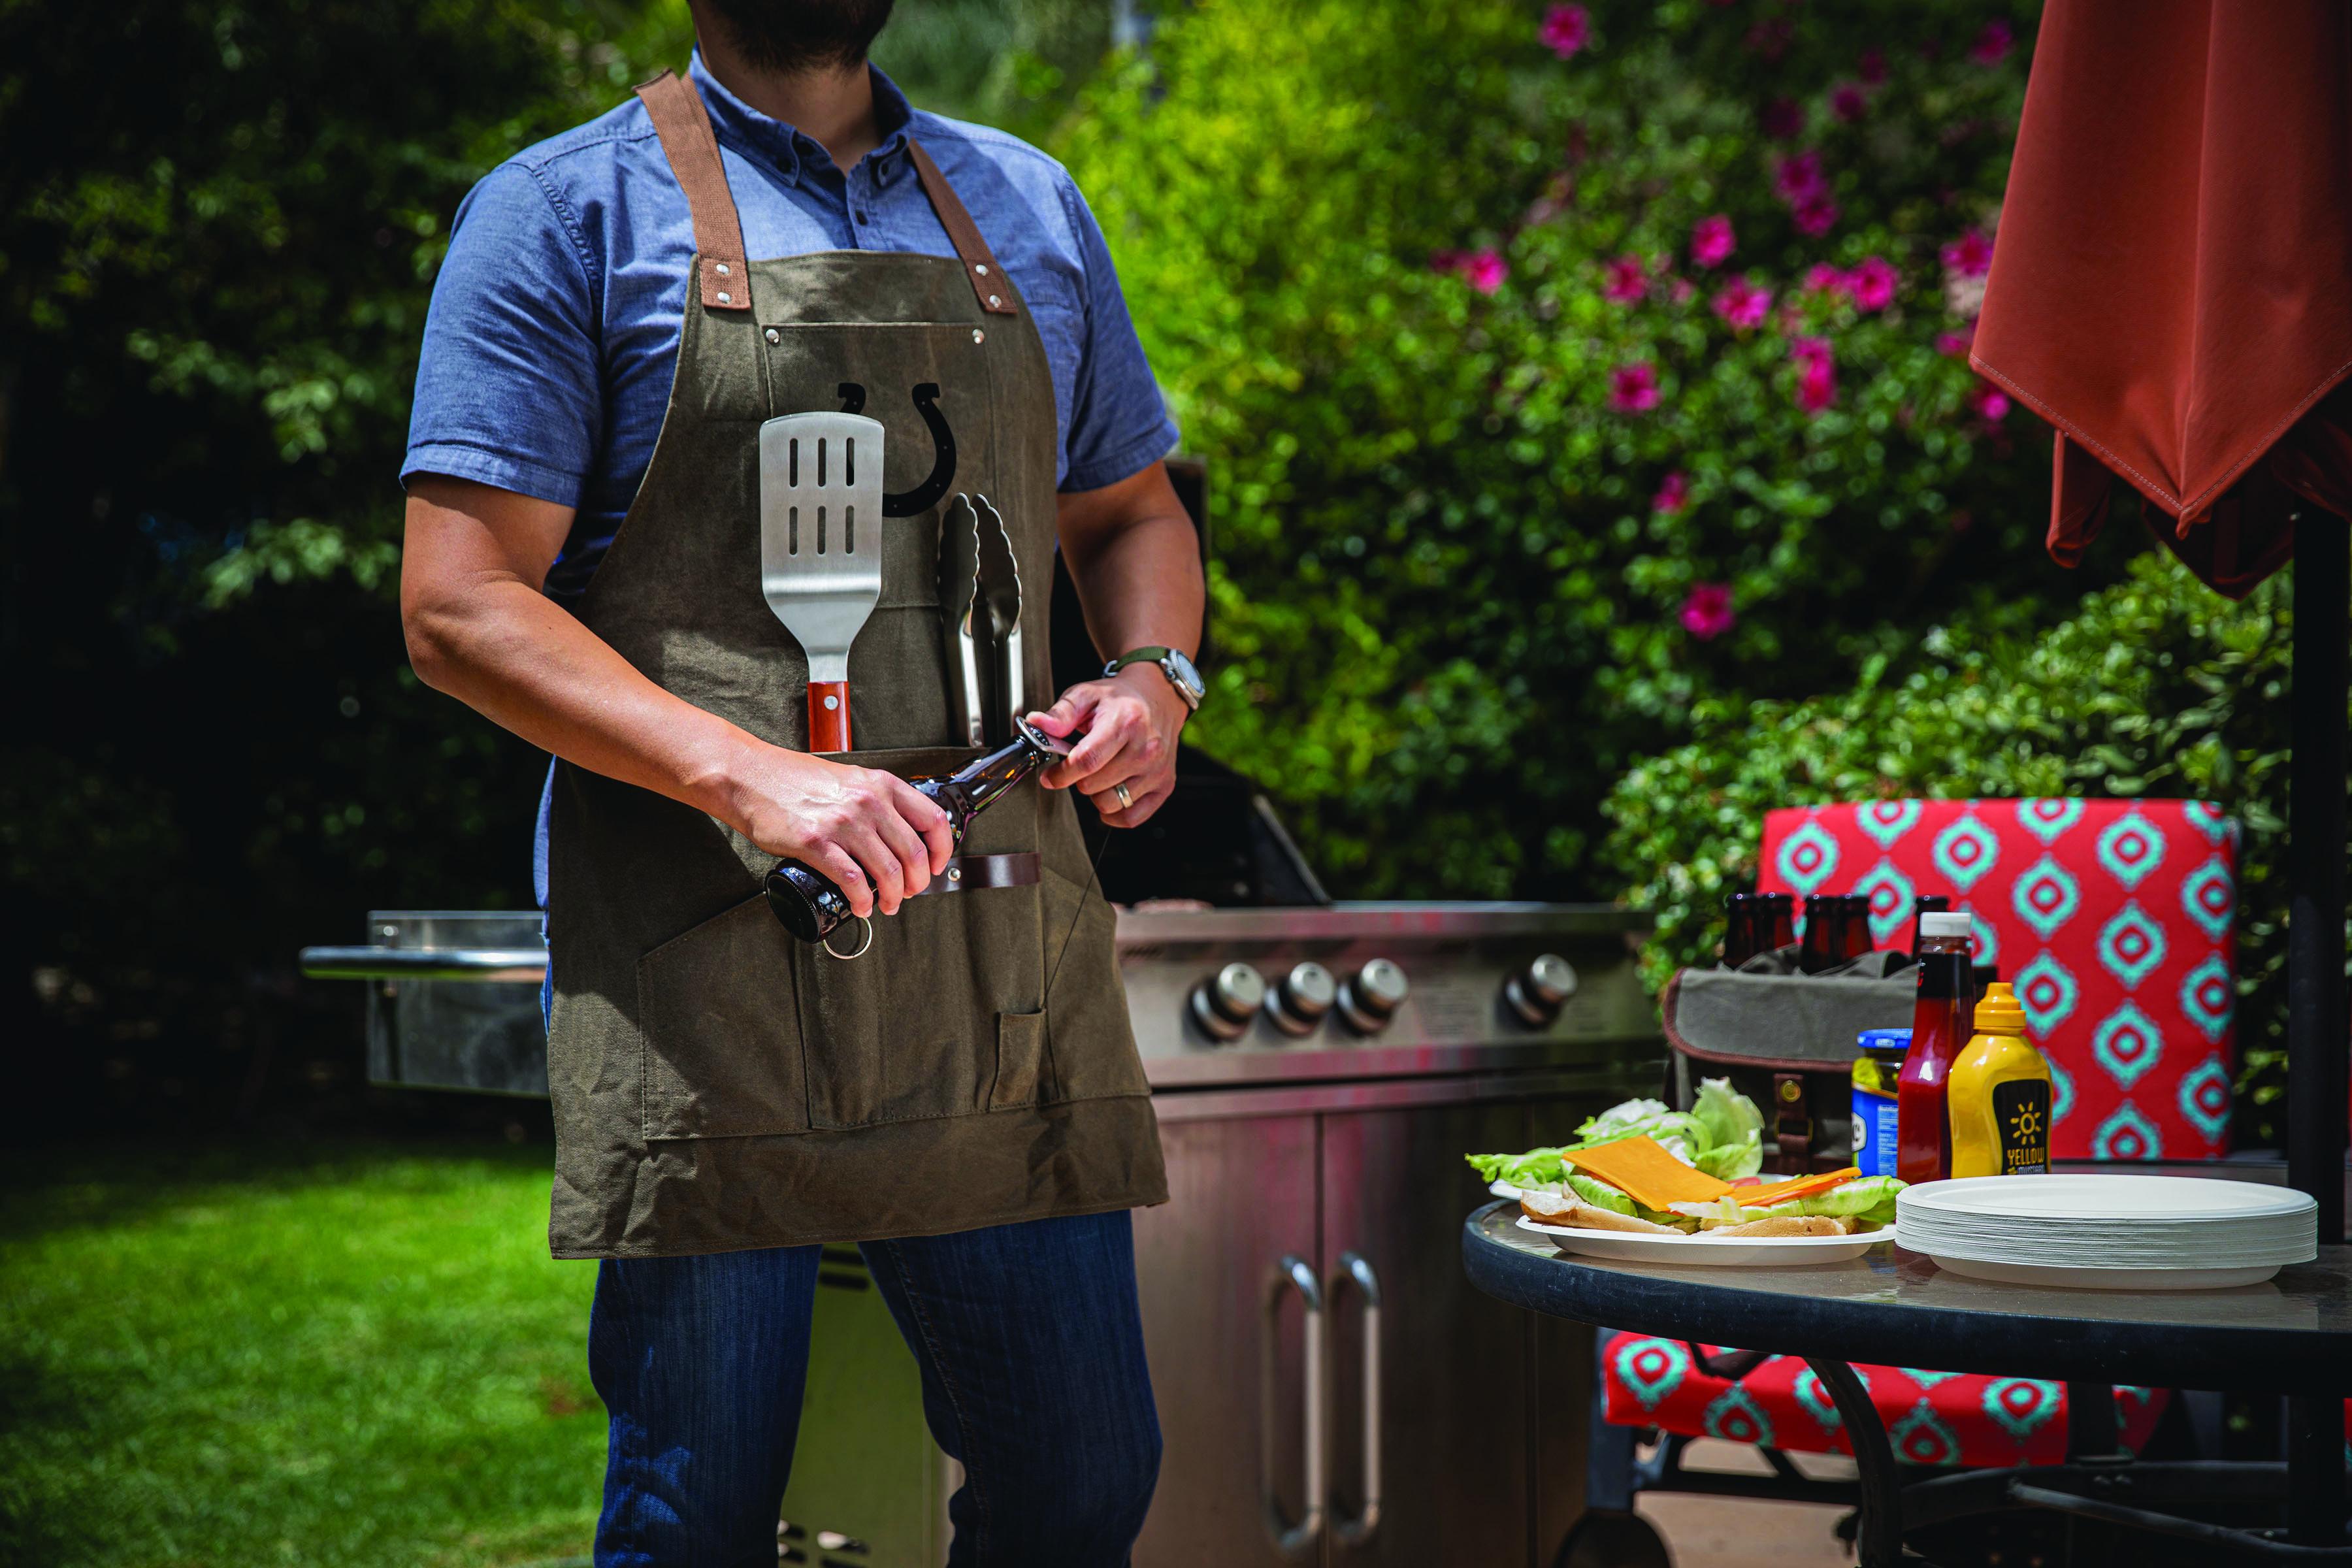 Indianapolis Colts - BBQ Apron with Tools & Bottle Opener